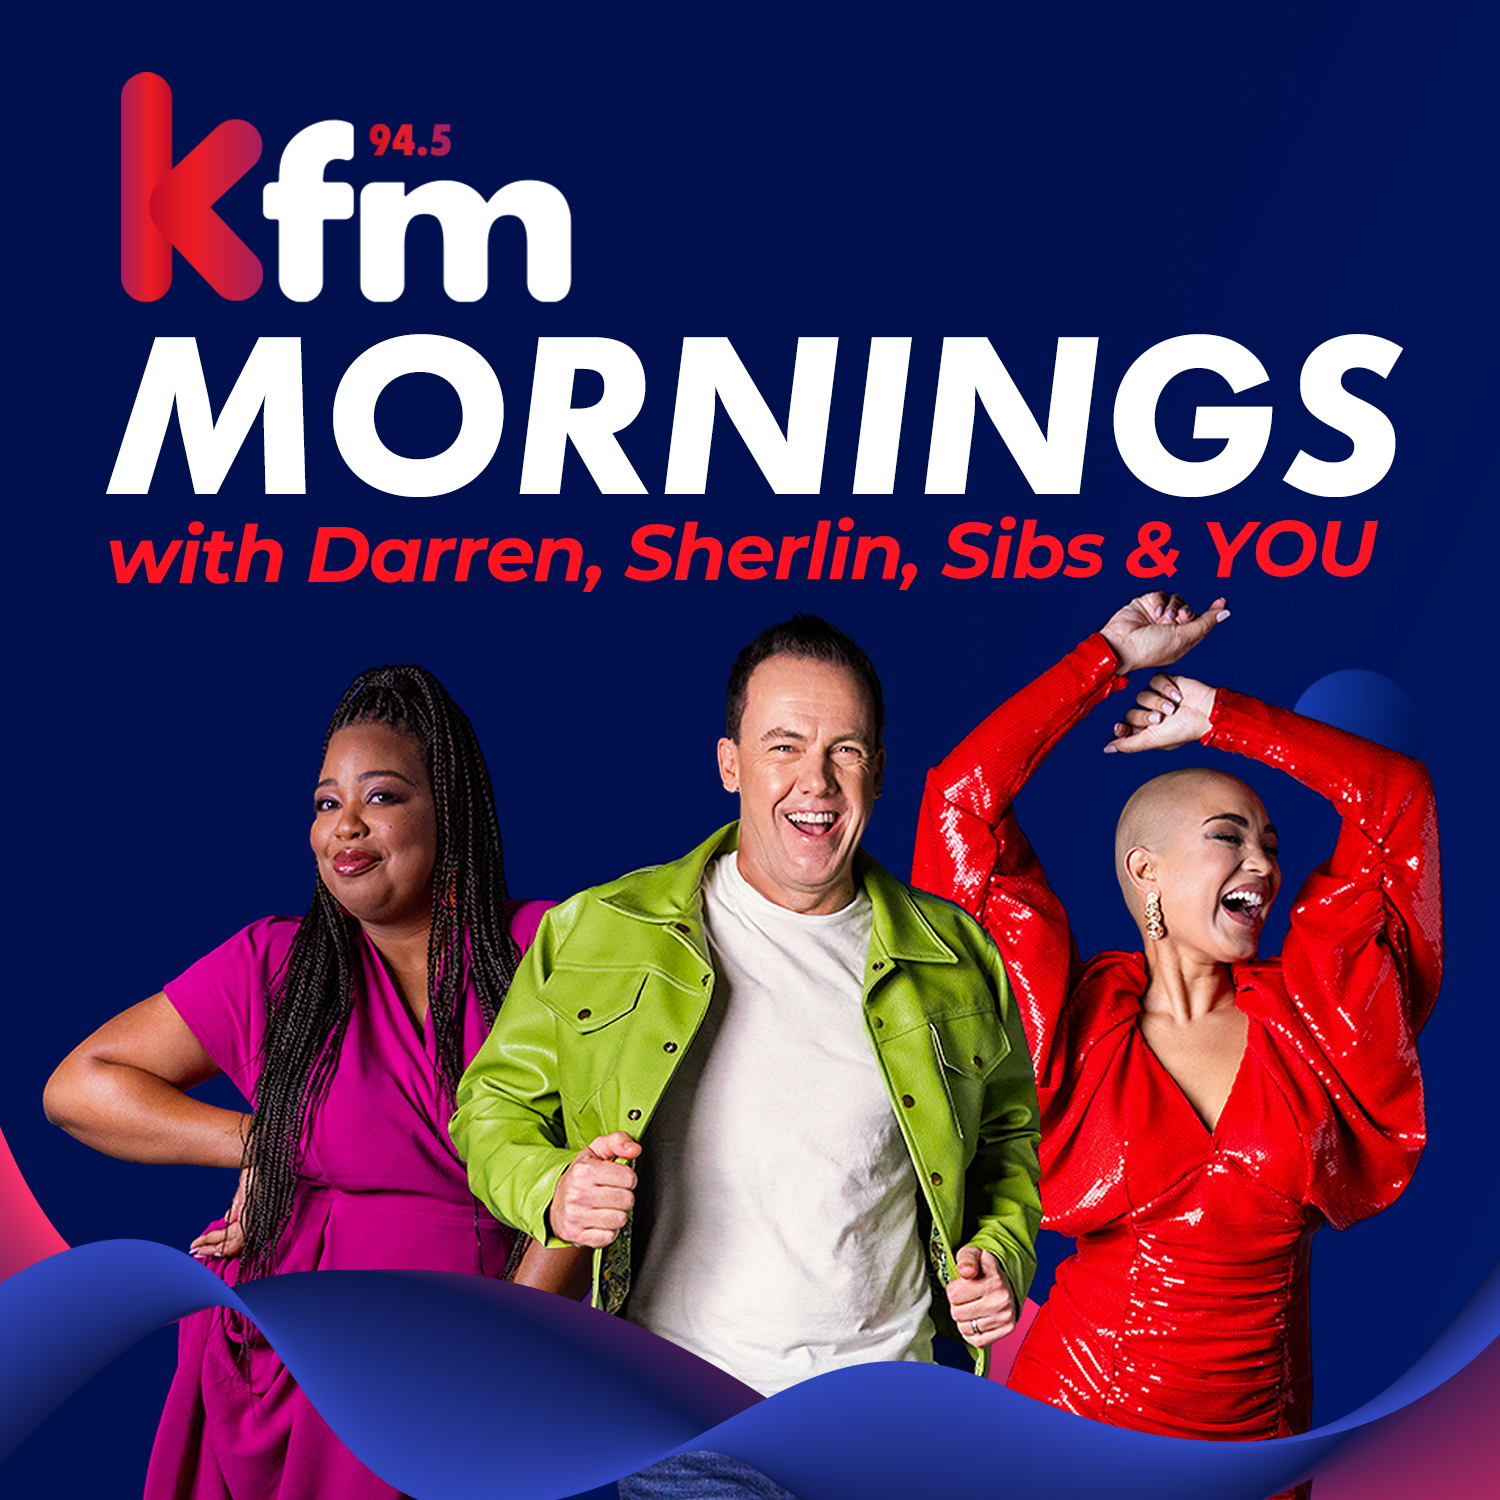 Kfm Mornings FULL SHOW: Afrikaans accent is the 2nd sexiest in the world